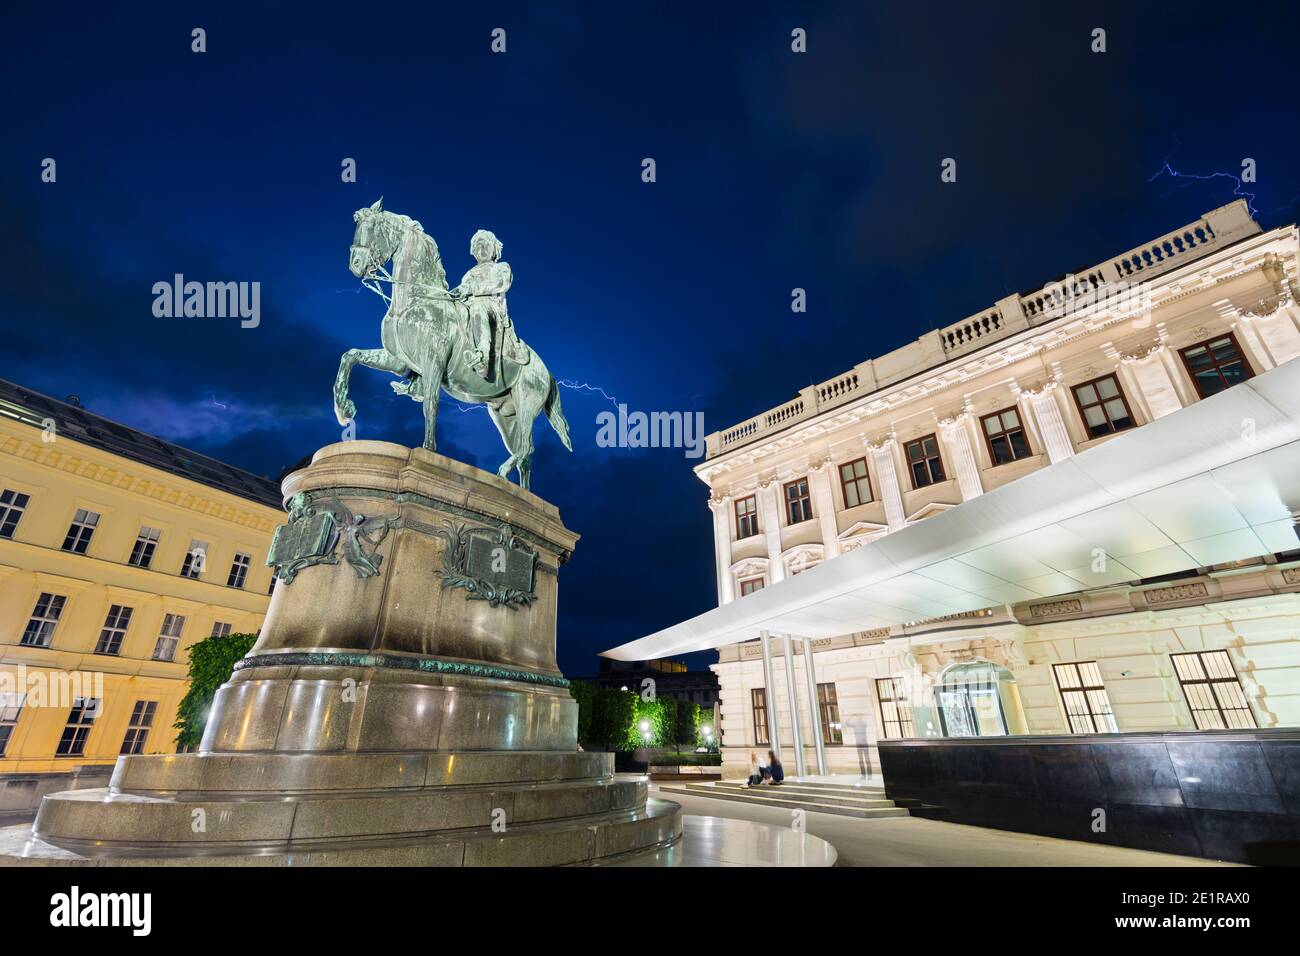 The Albertina building with lightning during a thunderstorm behind the Erzherzog Albrecht Statue at night in Vienna, Austria. Stock Photo